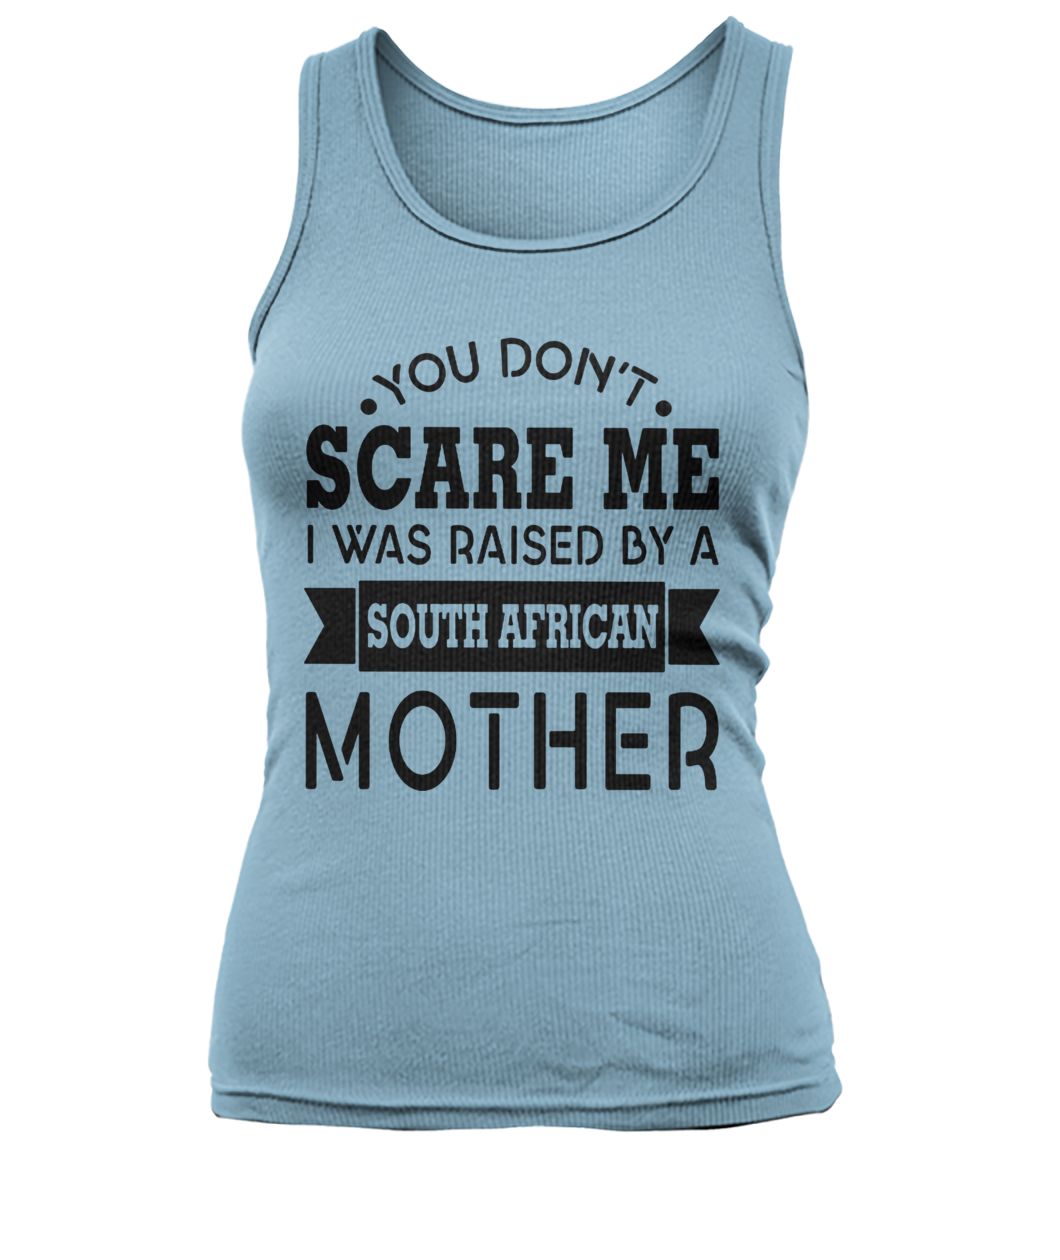 You don't scare me I was raised by a south african mother women's tank top